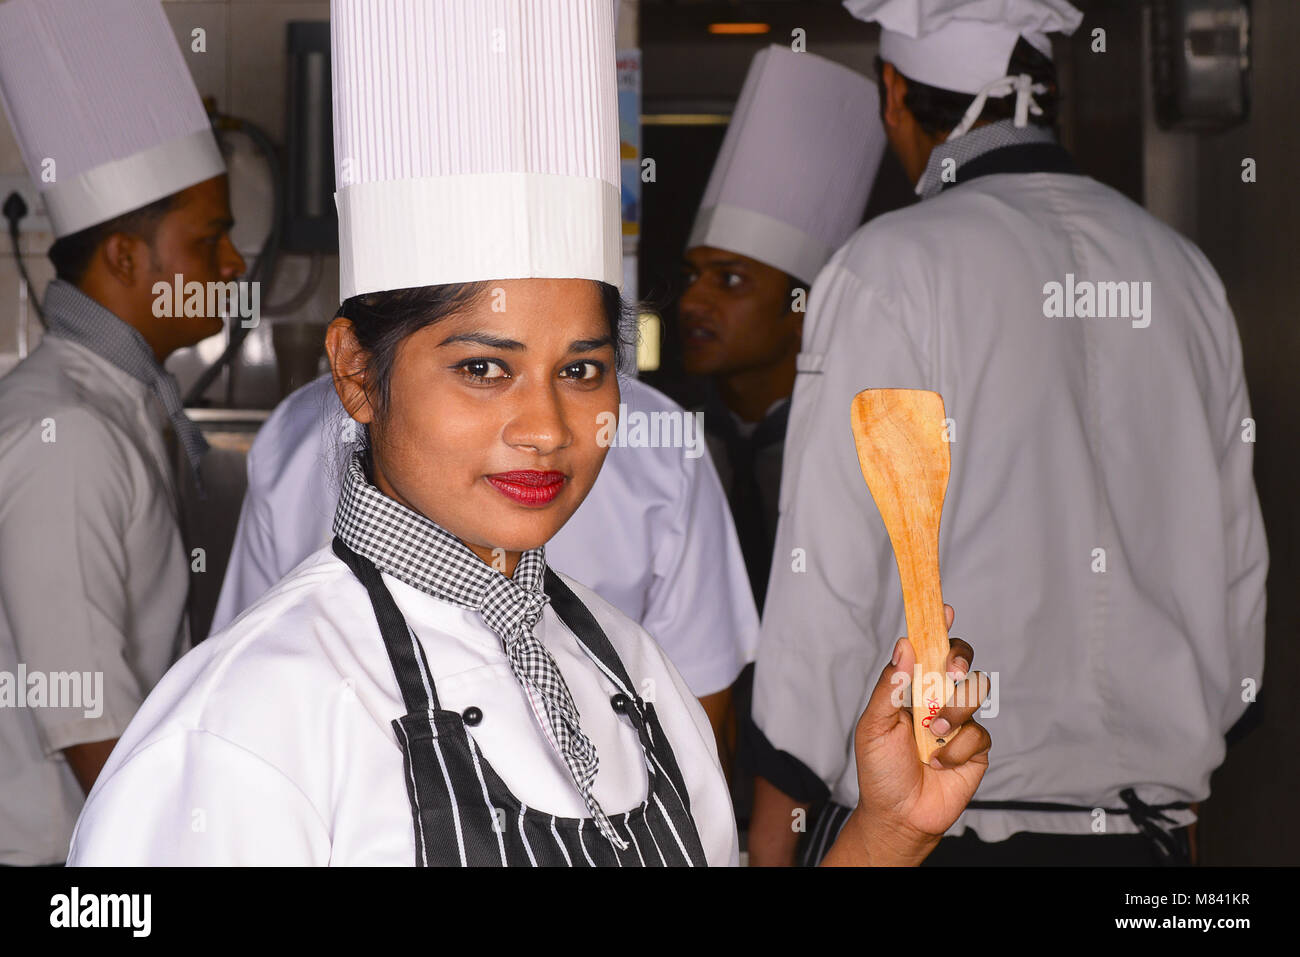 Female chef holding a wooden spatula Stock Photo